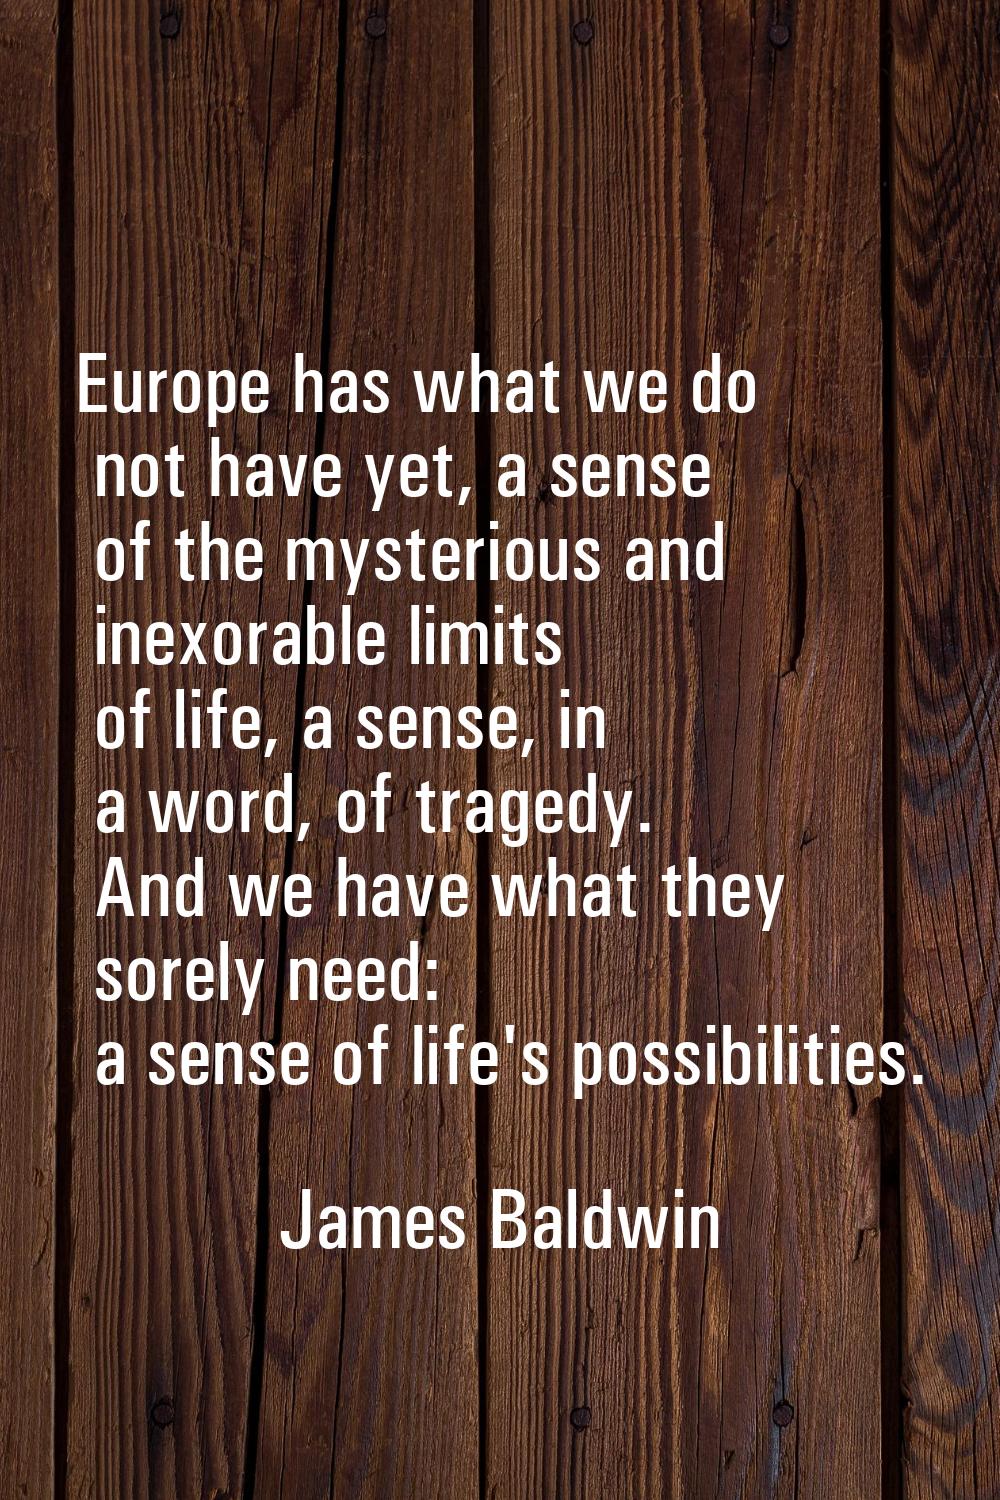 Europe has what we do not have yet, a sense of the mysterious and inexorable limits of life, a sens